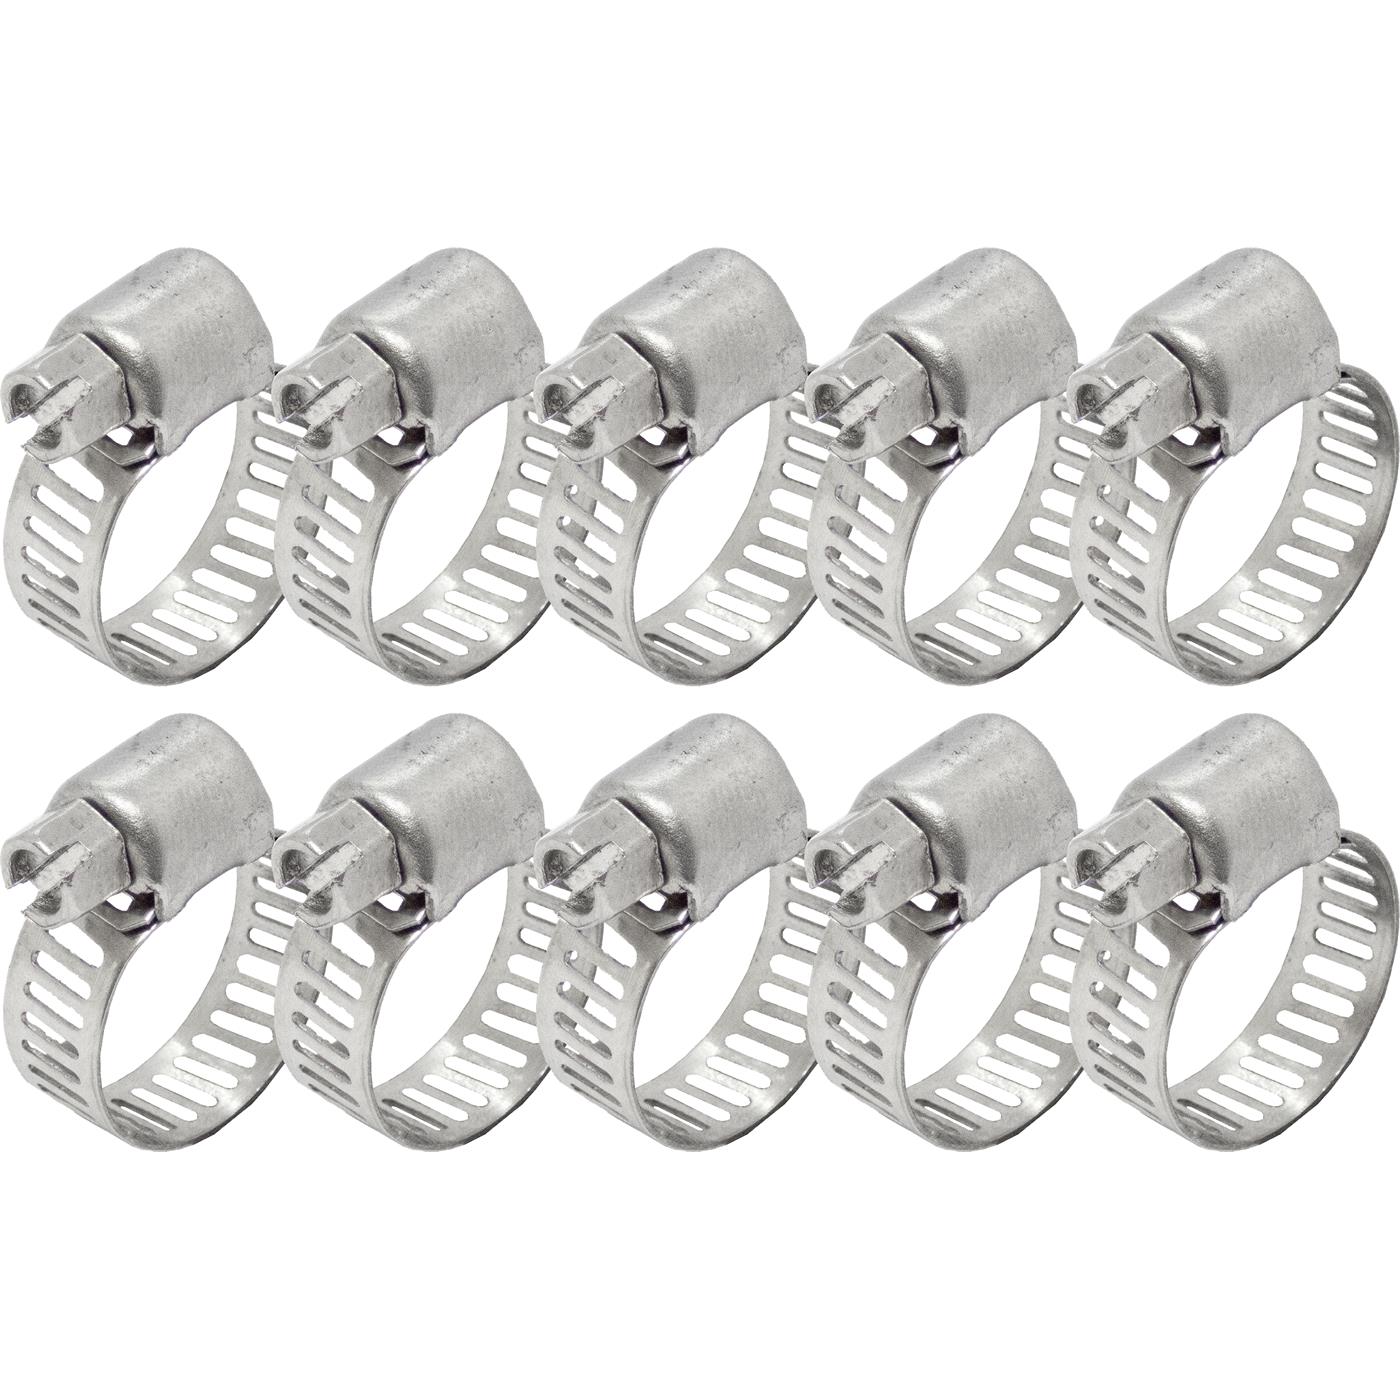 10x Hose clamp Stainless steel V2A 201 13-19mm Pipe clamp Hose clamp